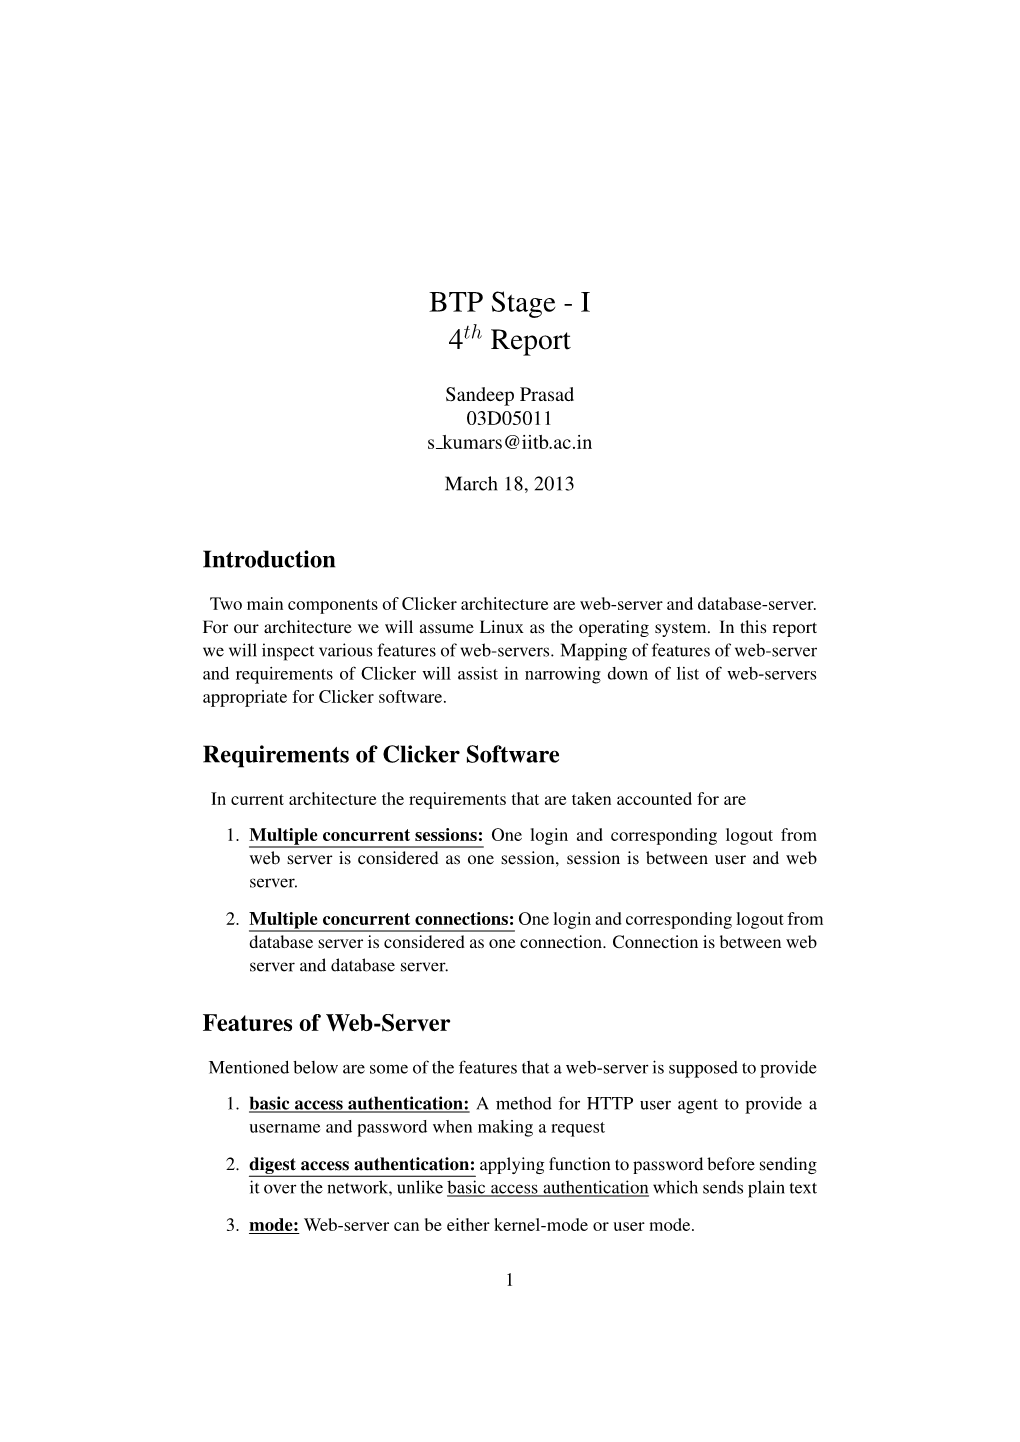 BTP Stage - I 4Th Report